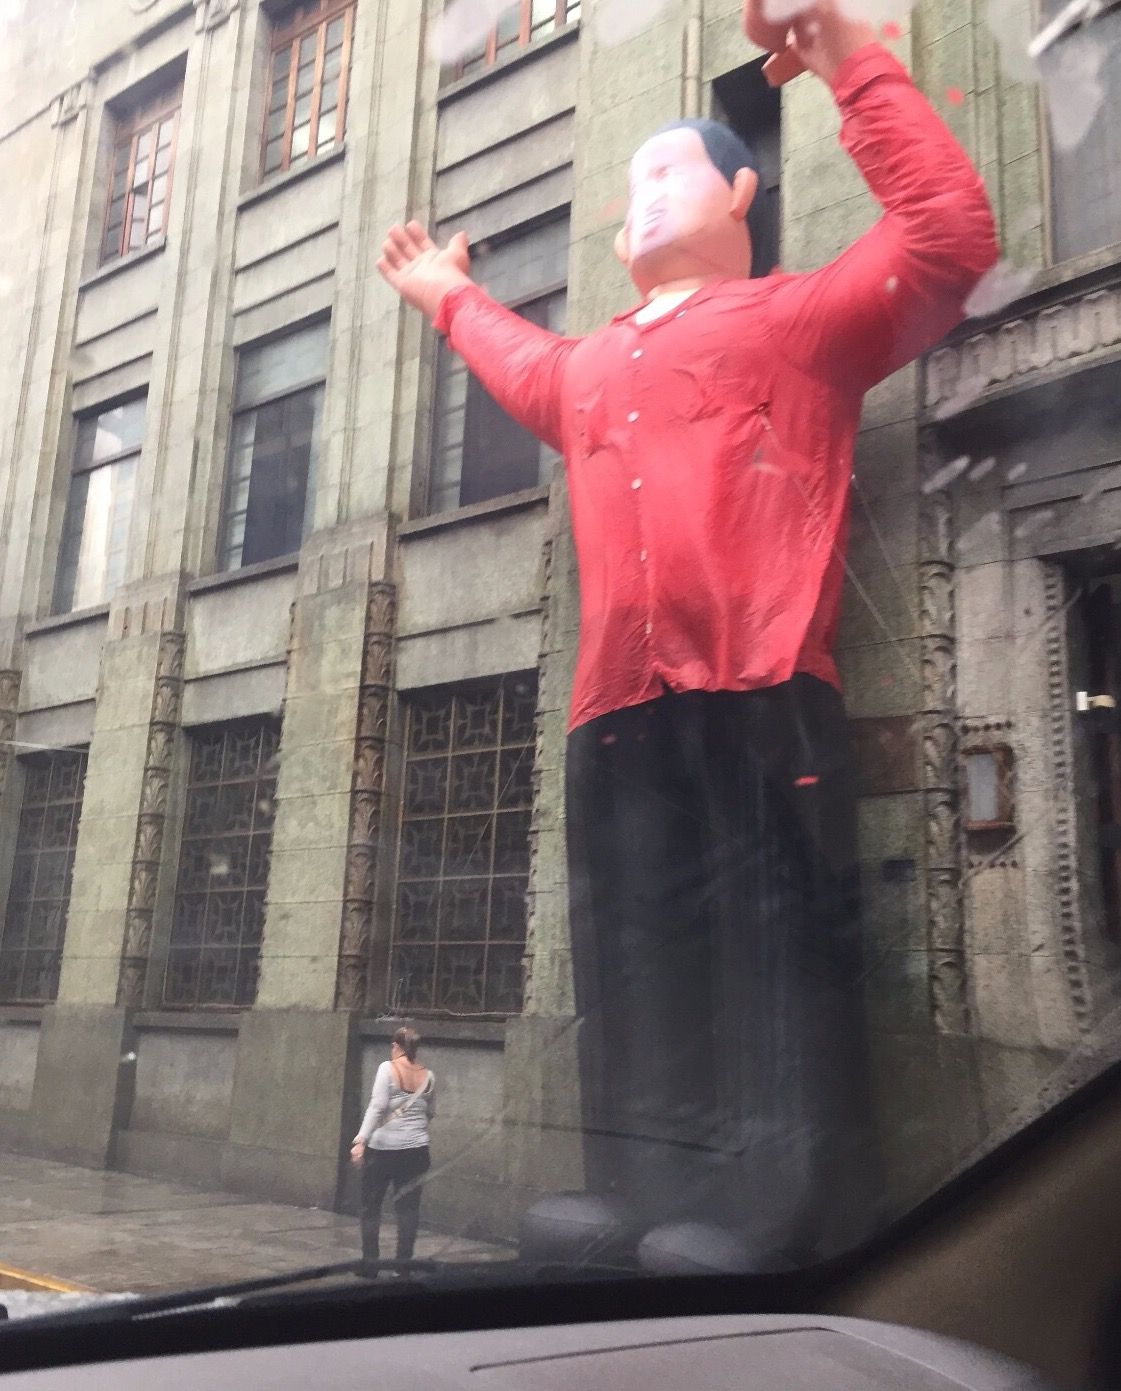 Inflatable figure of Hugo Chávez outside a building in the city's downtown area. Image by Fernando Gago. Venezuela, 2017.